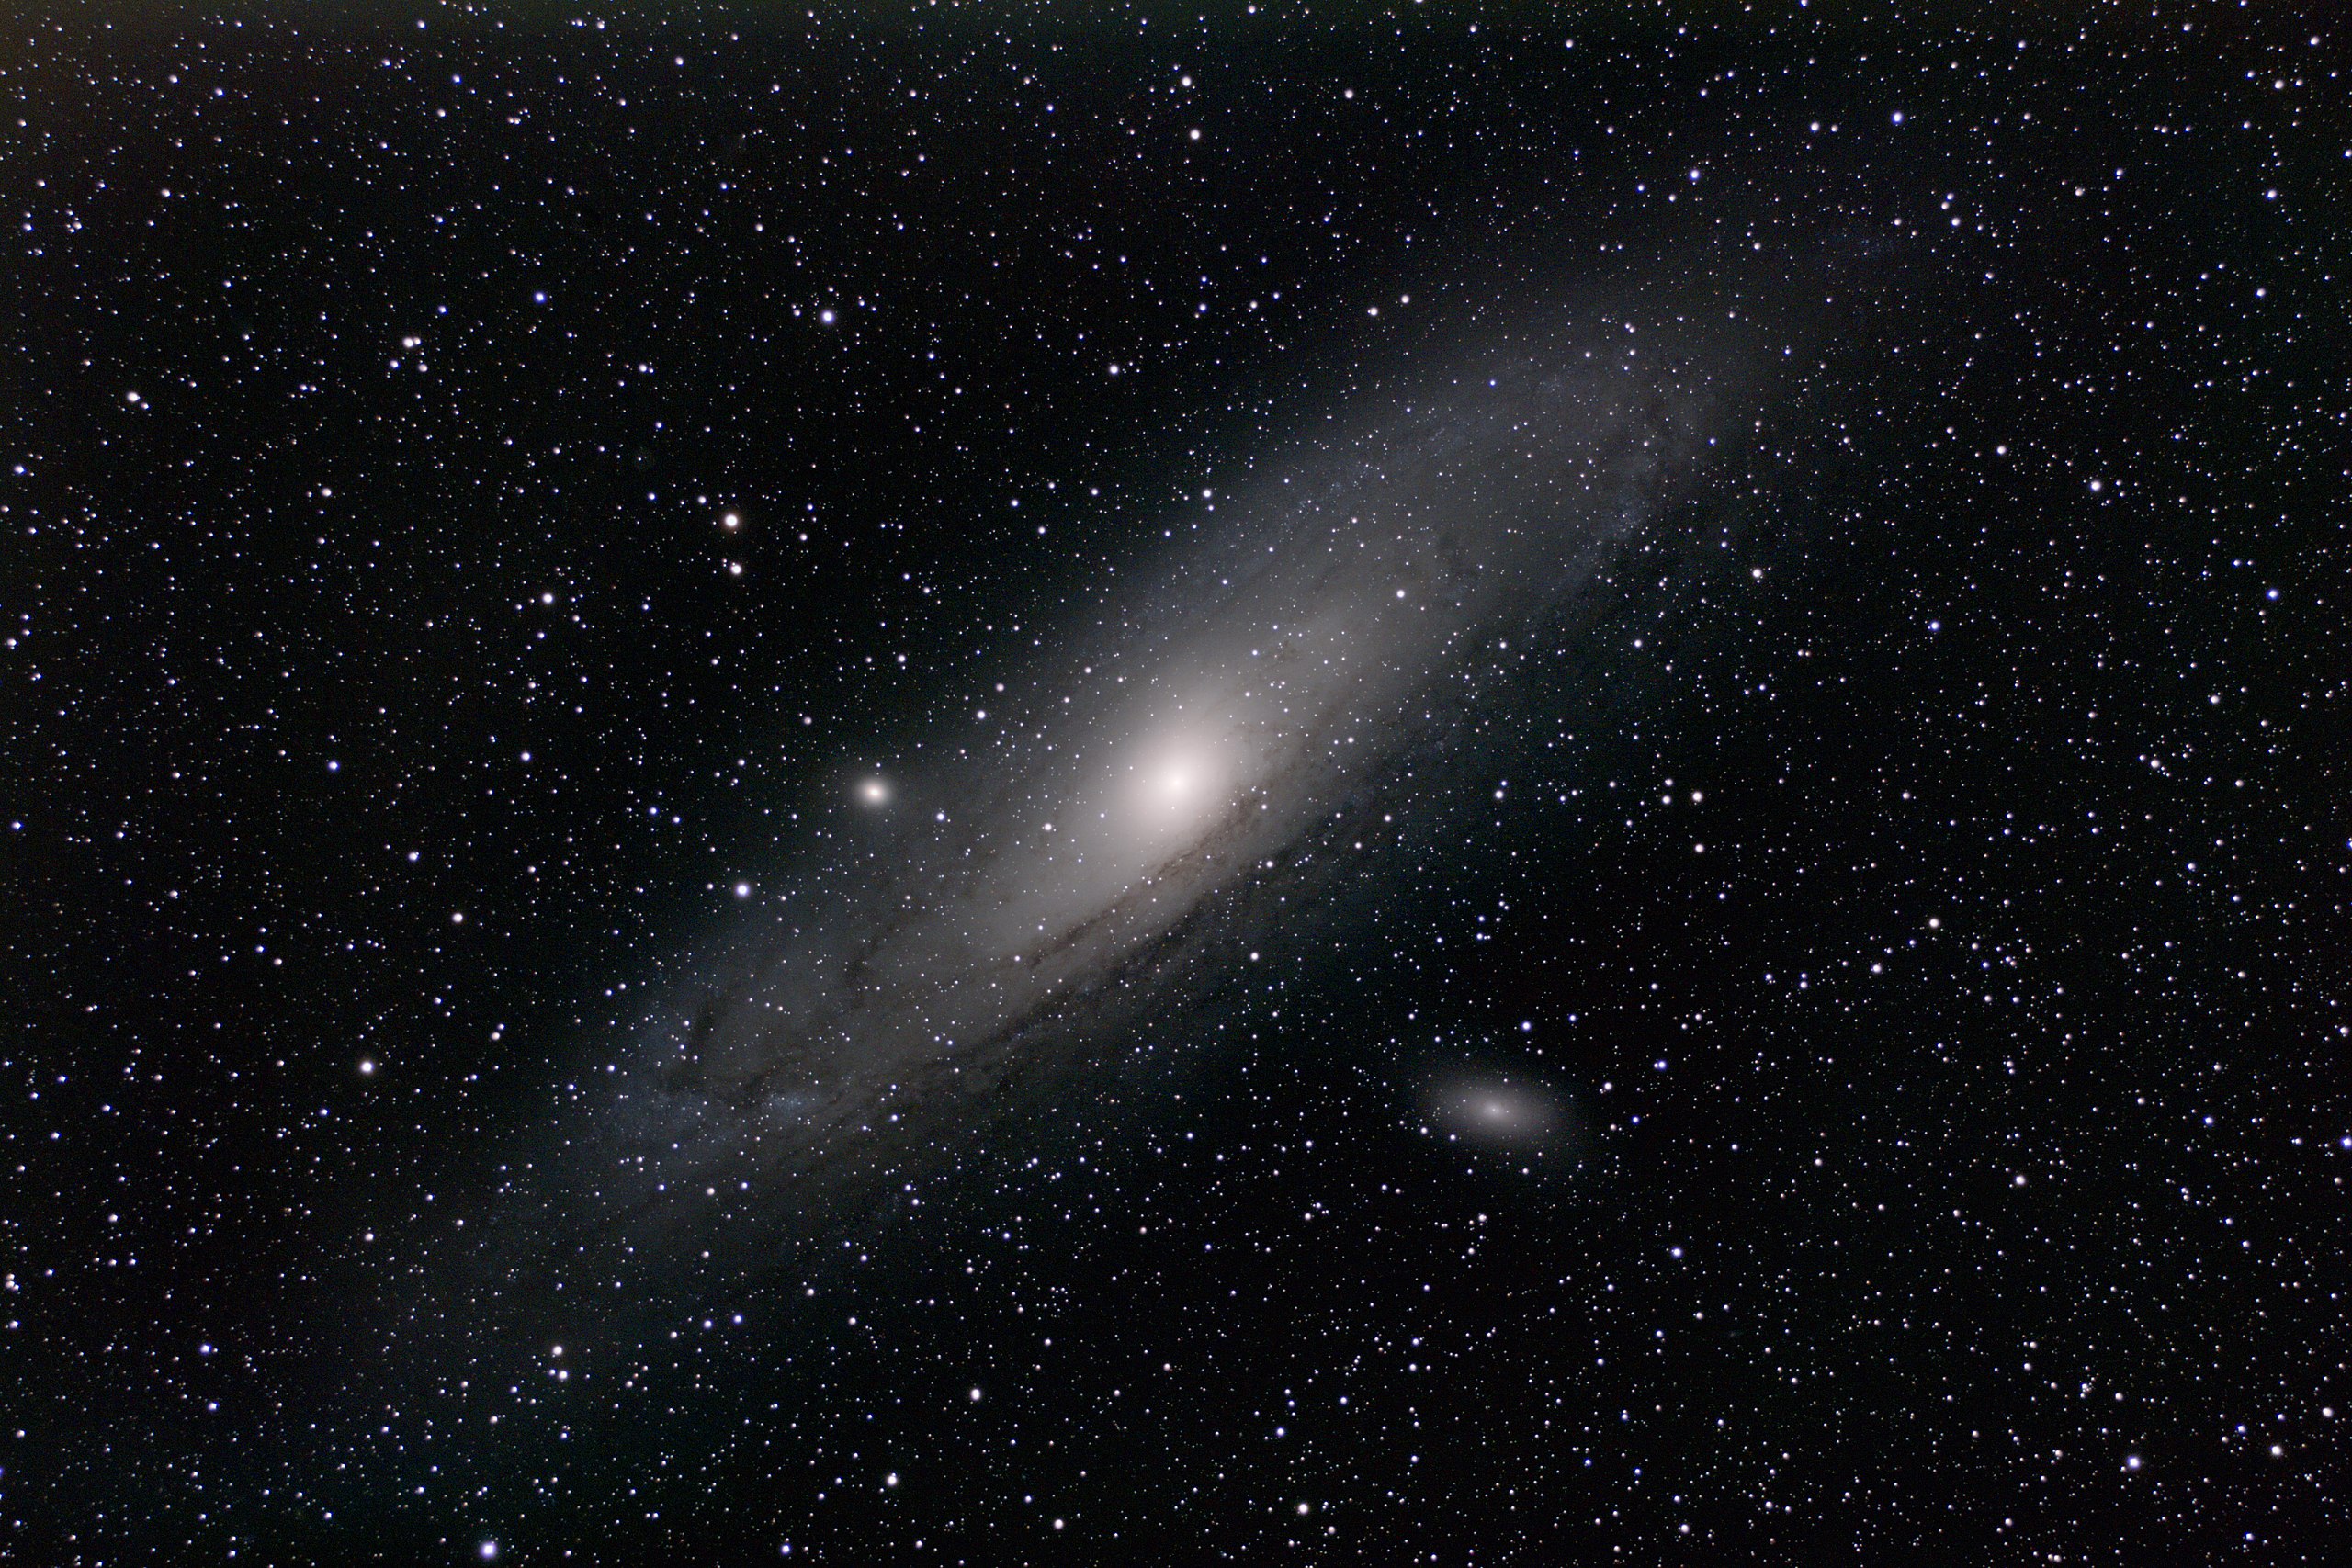 the galaxies m31 and one of its satellites, m110